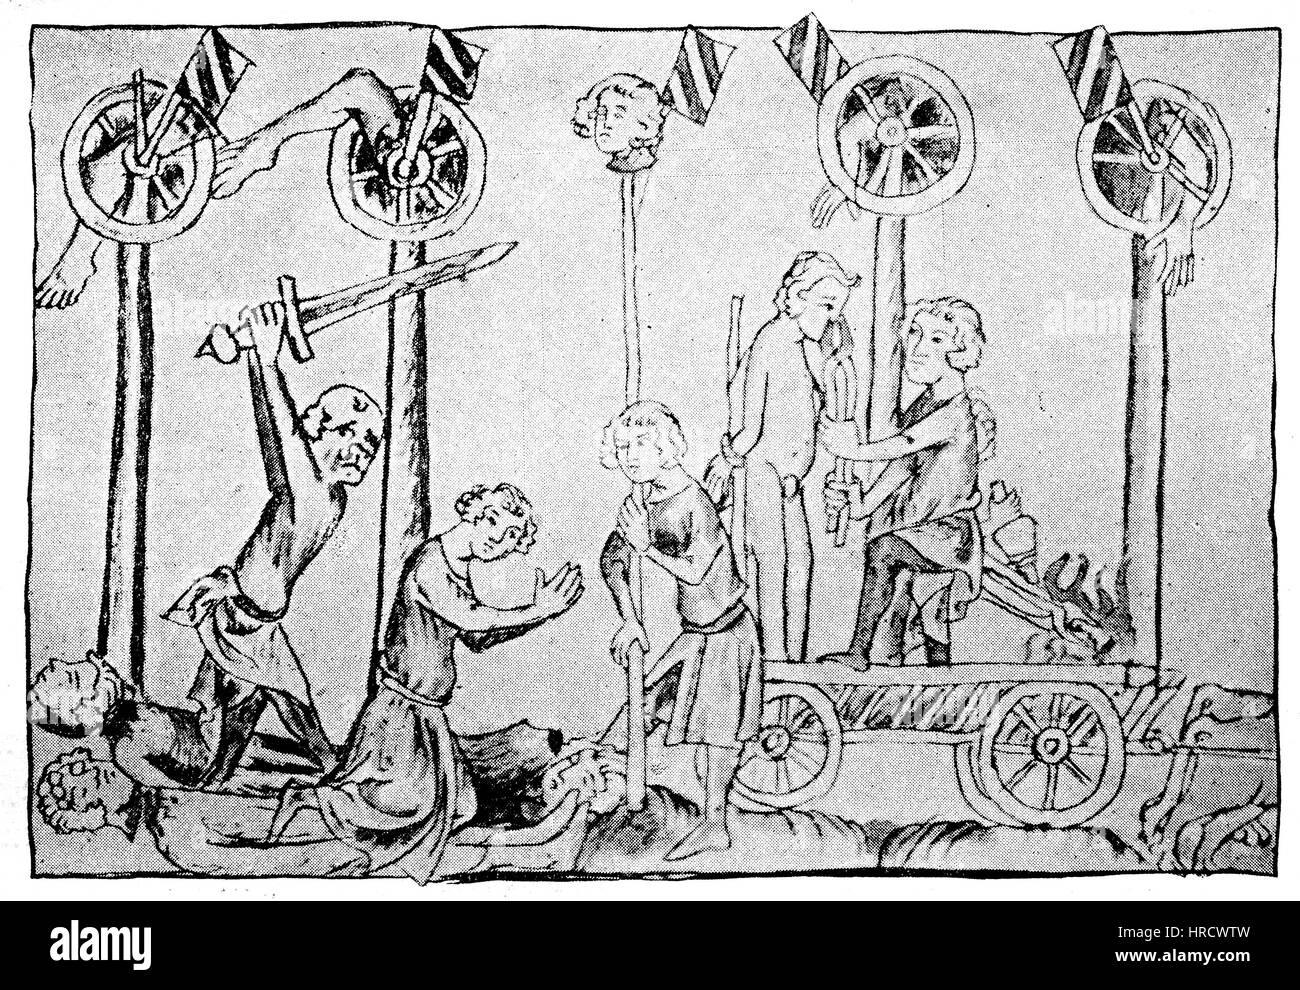 Execution of a man who has committed high treason, it was Tebaldo de Brusati, commander of Bresccia, that he was to be dragged through the camp, hanged on the gallows, beheaded, his intestines burned, the corpse was divided, the limbs individually bound to a wheel, Germany, middle of the 14th century, reproduction of an woodcut from the 19th century, 1885 Stock Photo